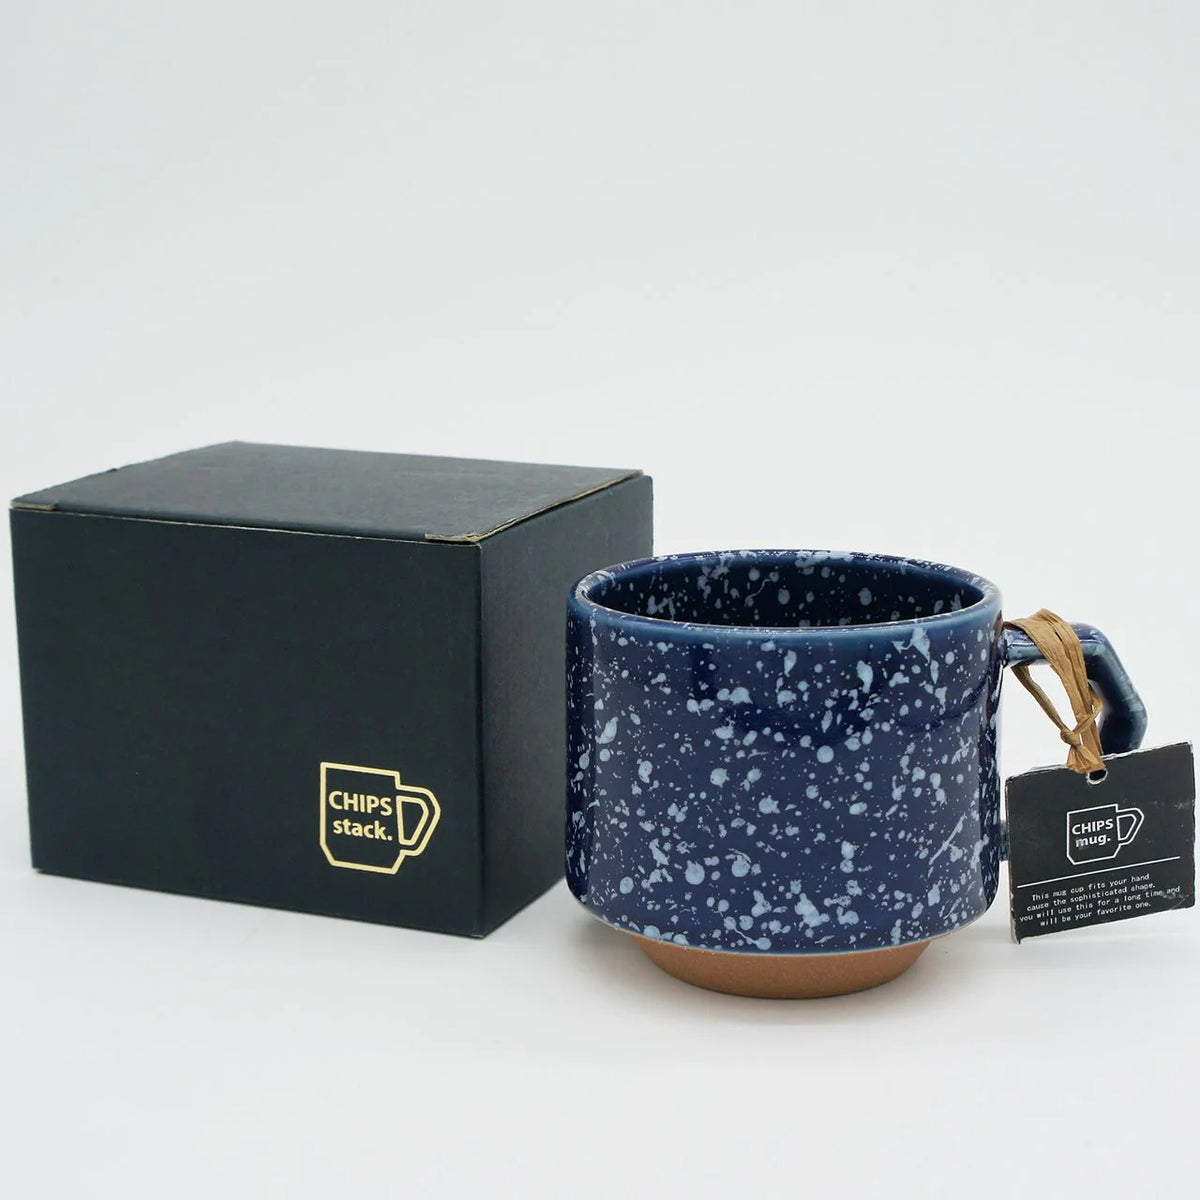 A seamlessly stackable porcelain (Minoyaki) Stacking Mug - Speckled Navy by CHIPS Inc. with a black box.